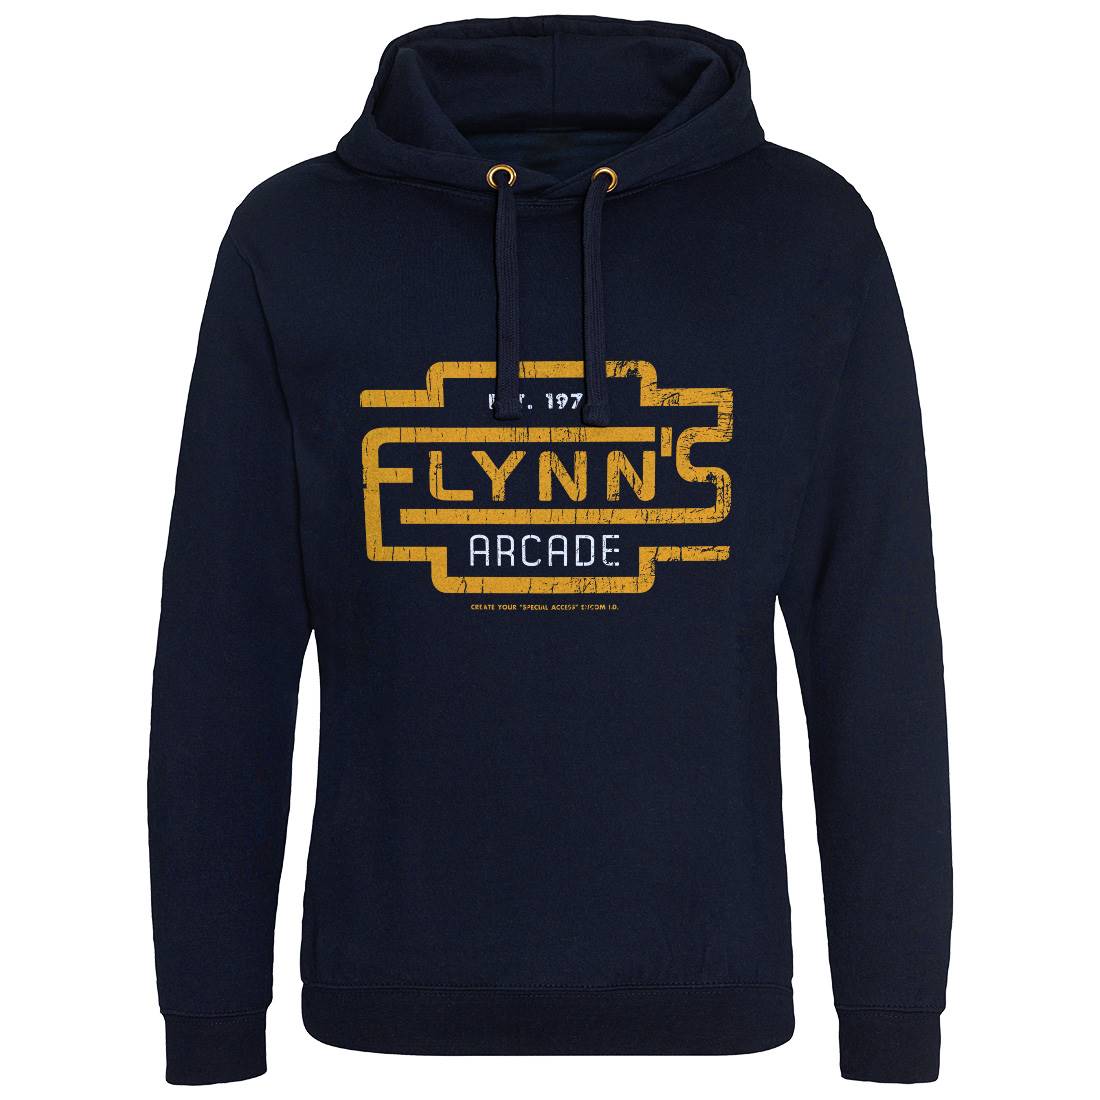 Flynns Arcade Mens Hoodie Without Pocket Space D277